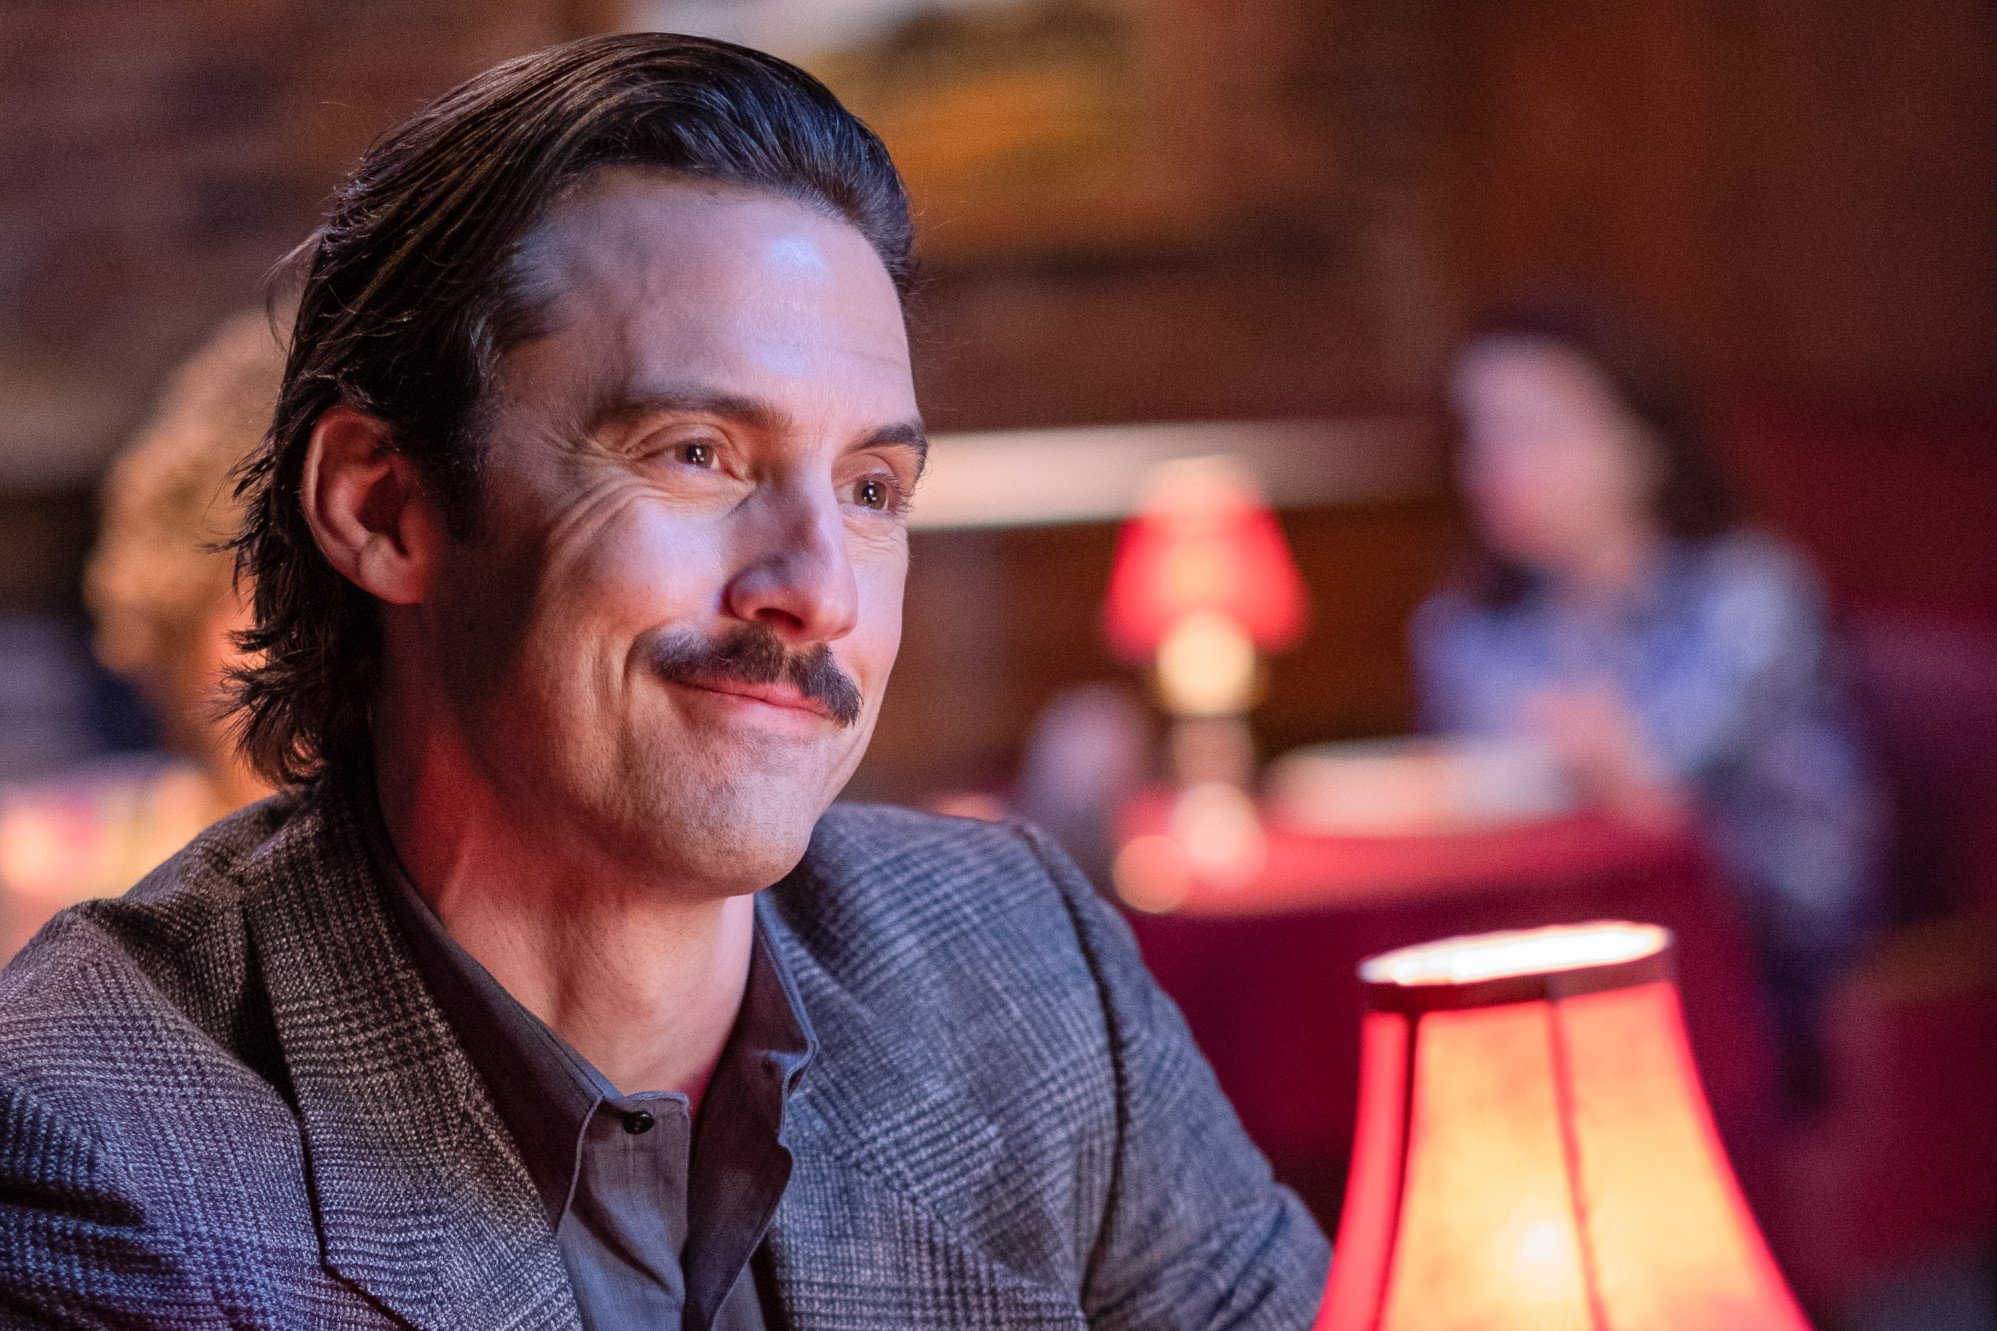 Milo Ventimiglia, in character as Jack in 'This Is Us' Season 6 Episode 13, wears a gray suit over a gray button-up shirt.